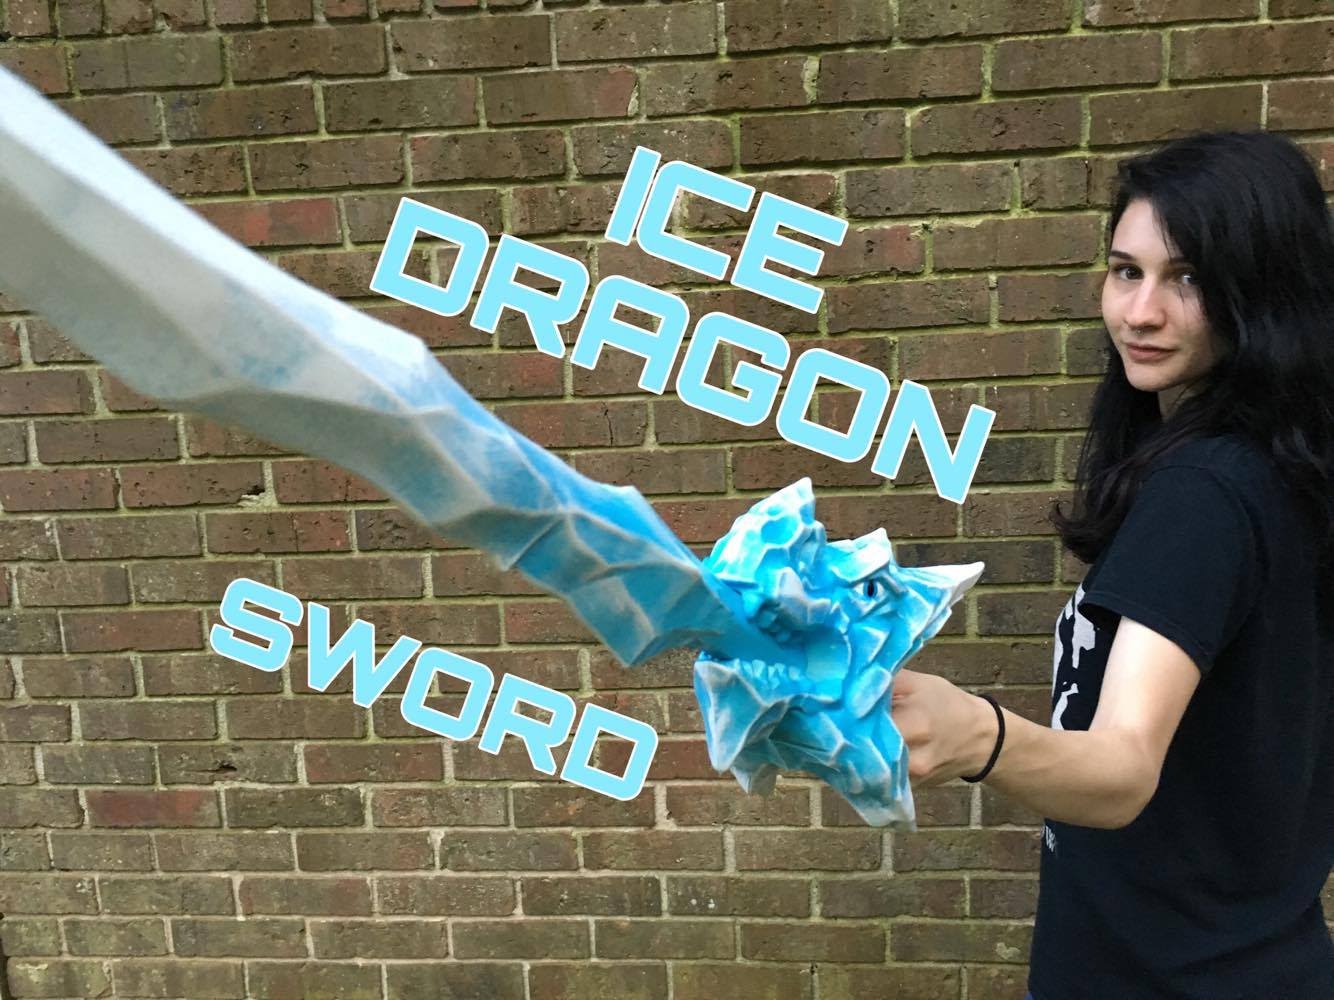 An ICE DRAGON SWORD from Formidable Toys.